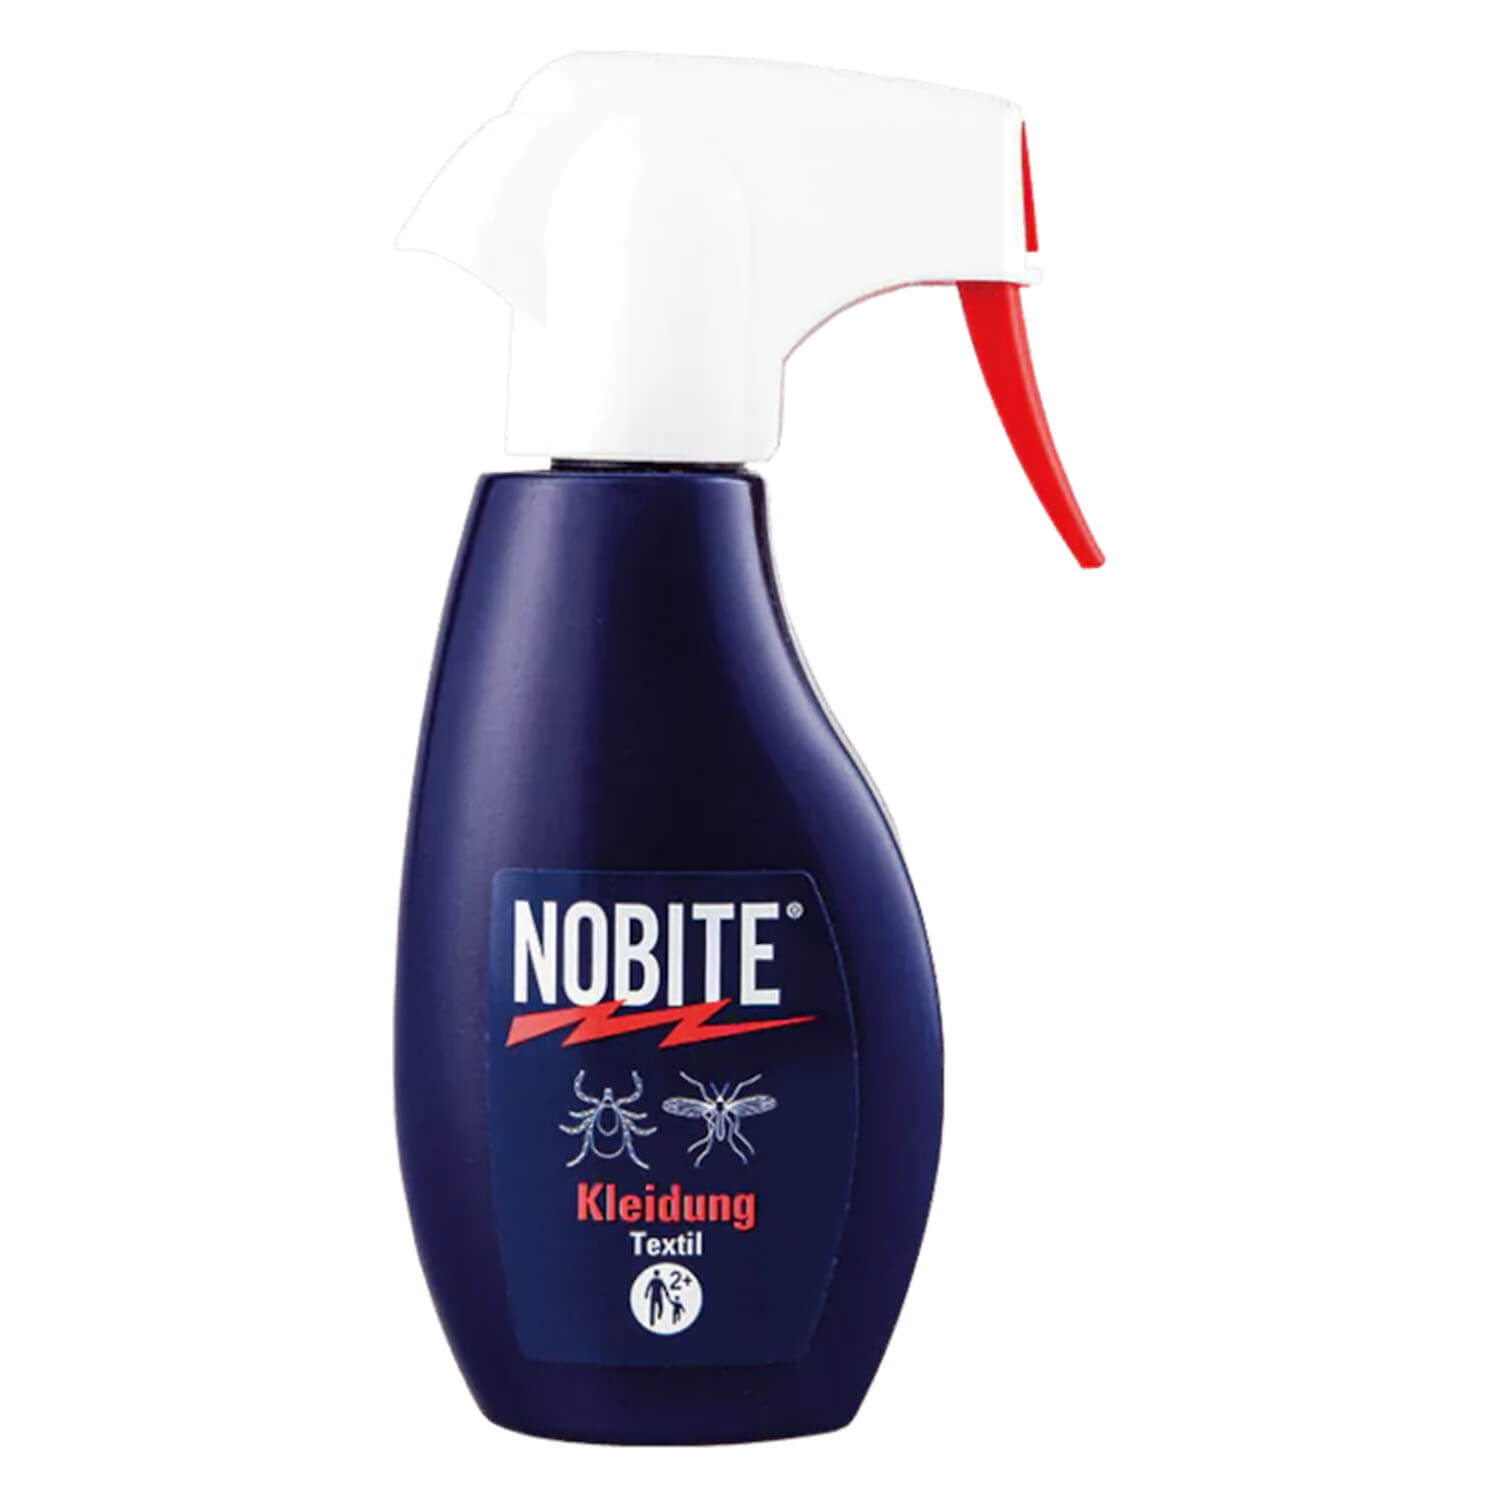 Nobite insect protection spray 200ml - Insect Protection